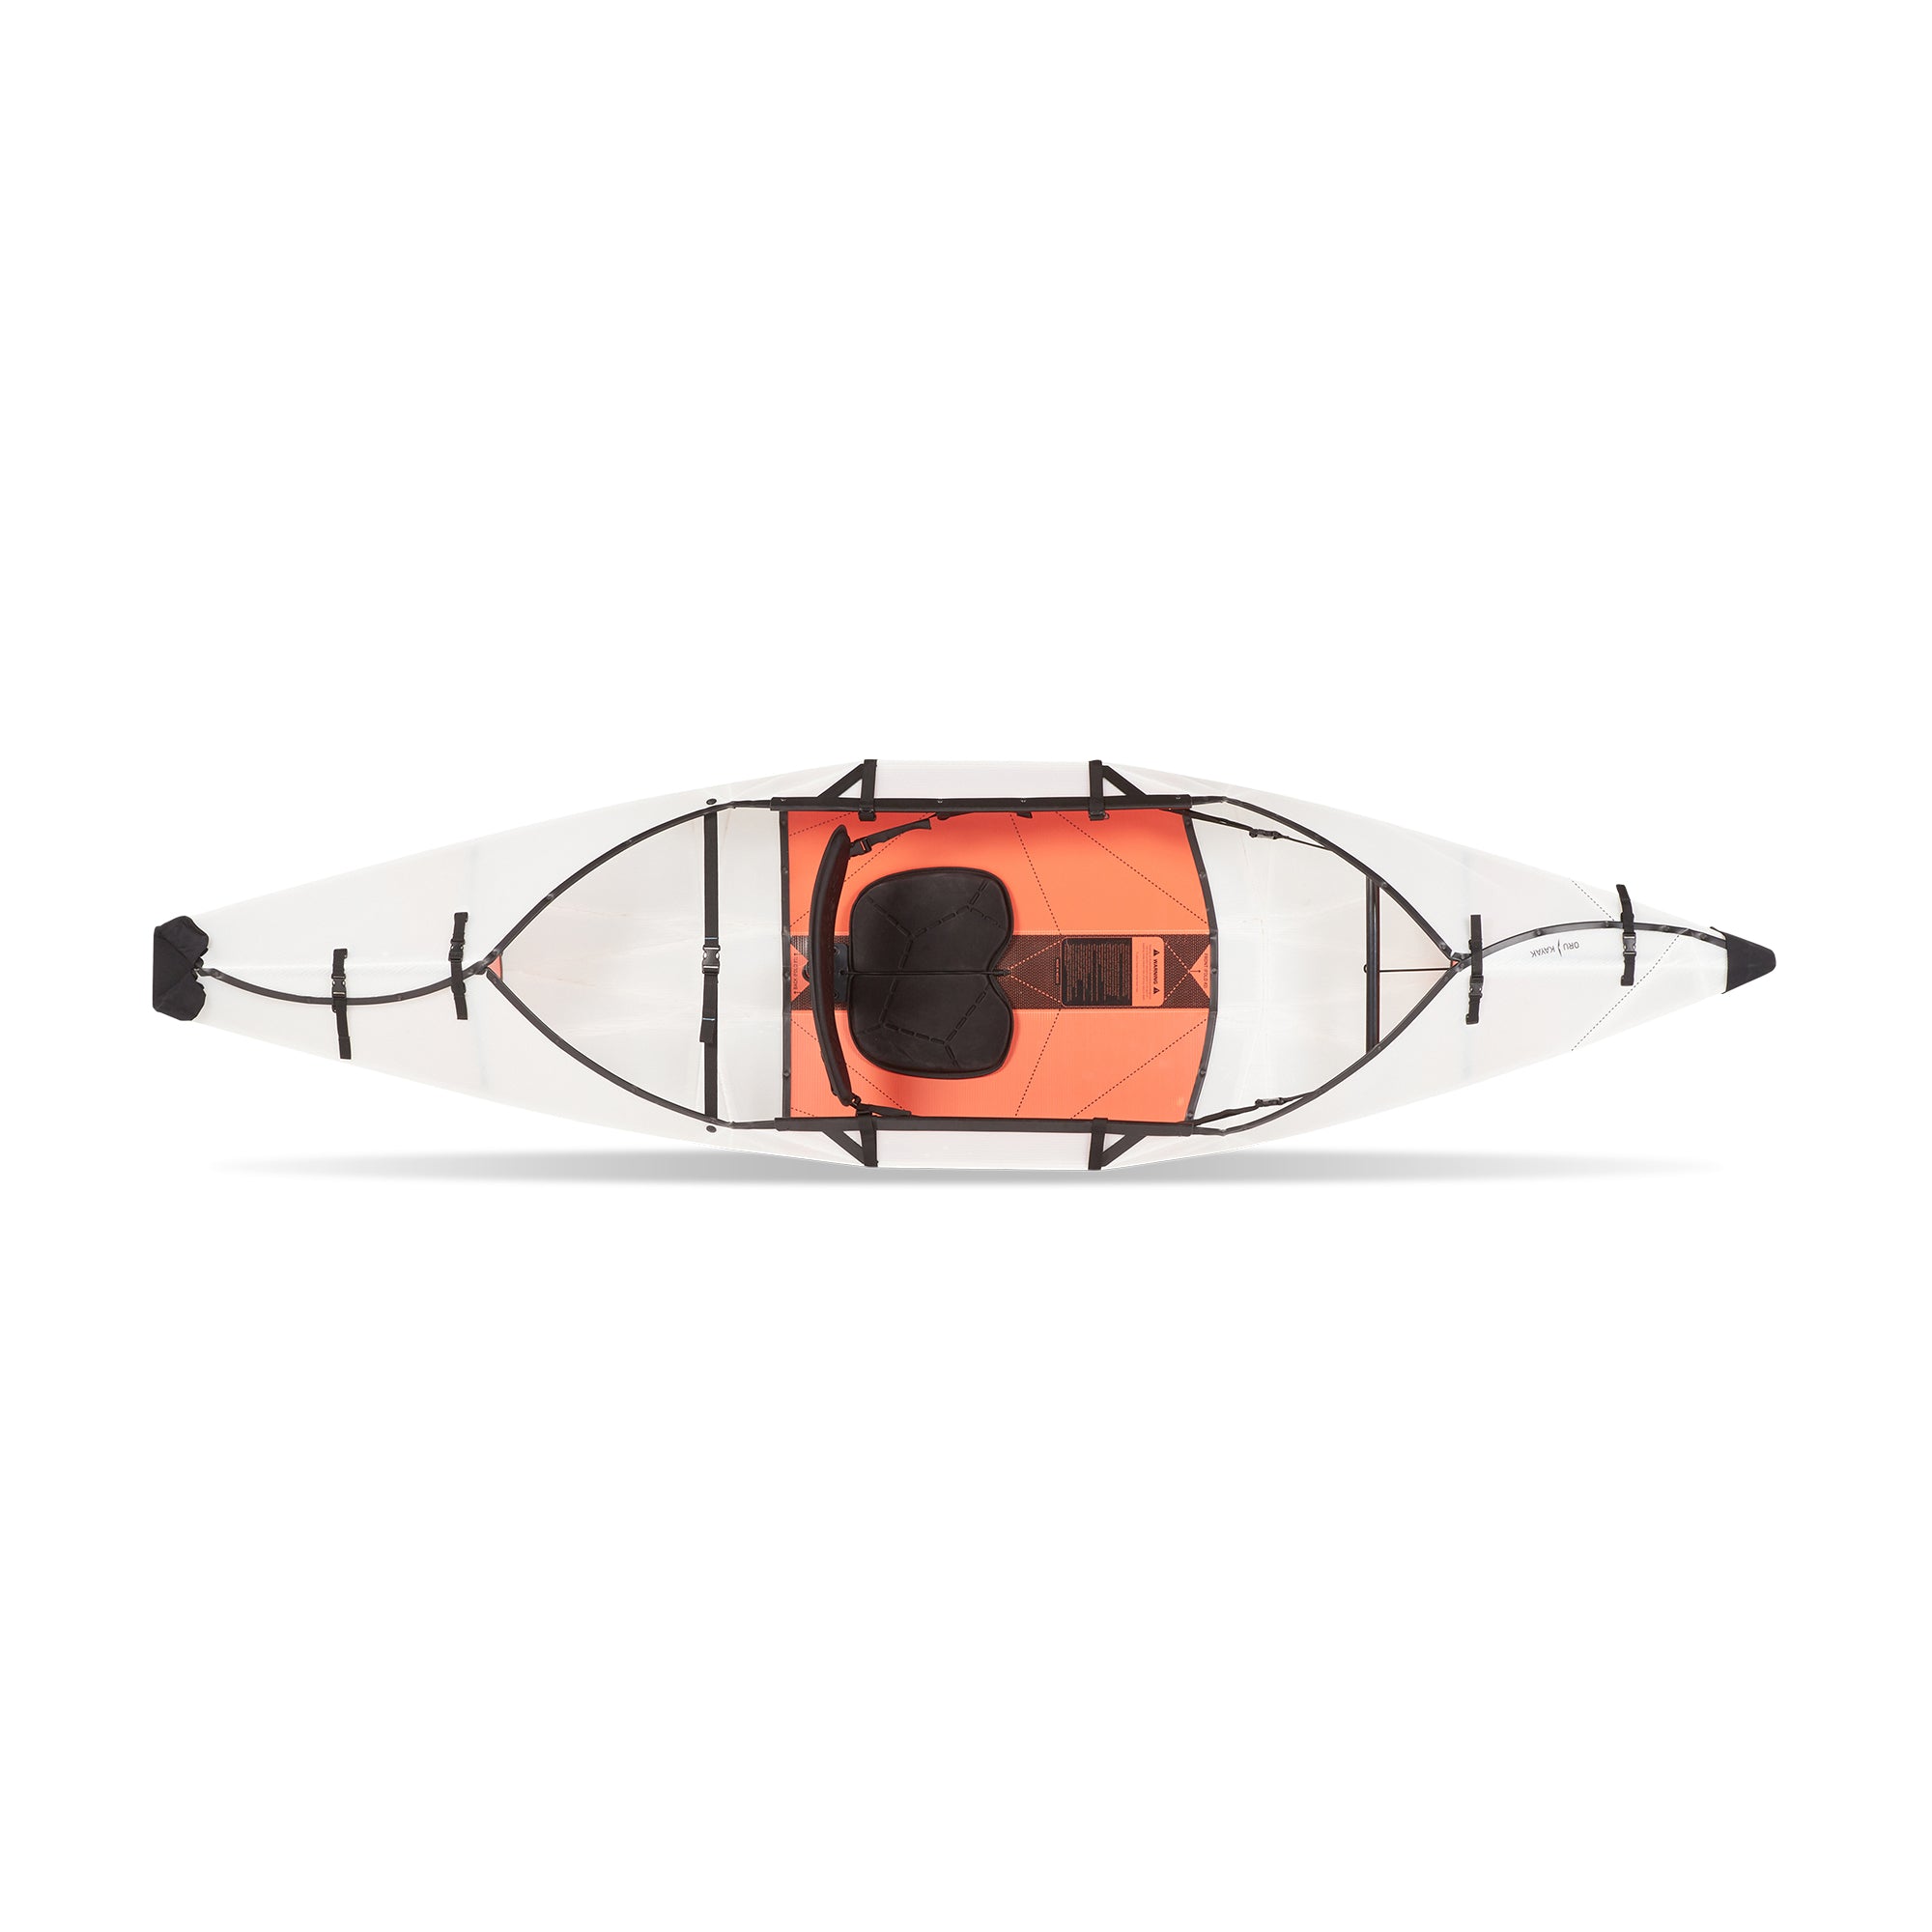 Exciting electric motor kayak For Thrill And Adventure 